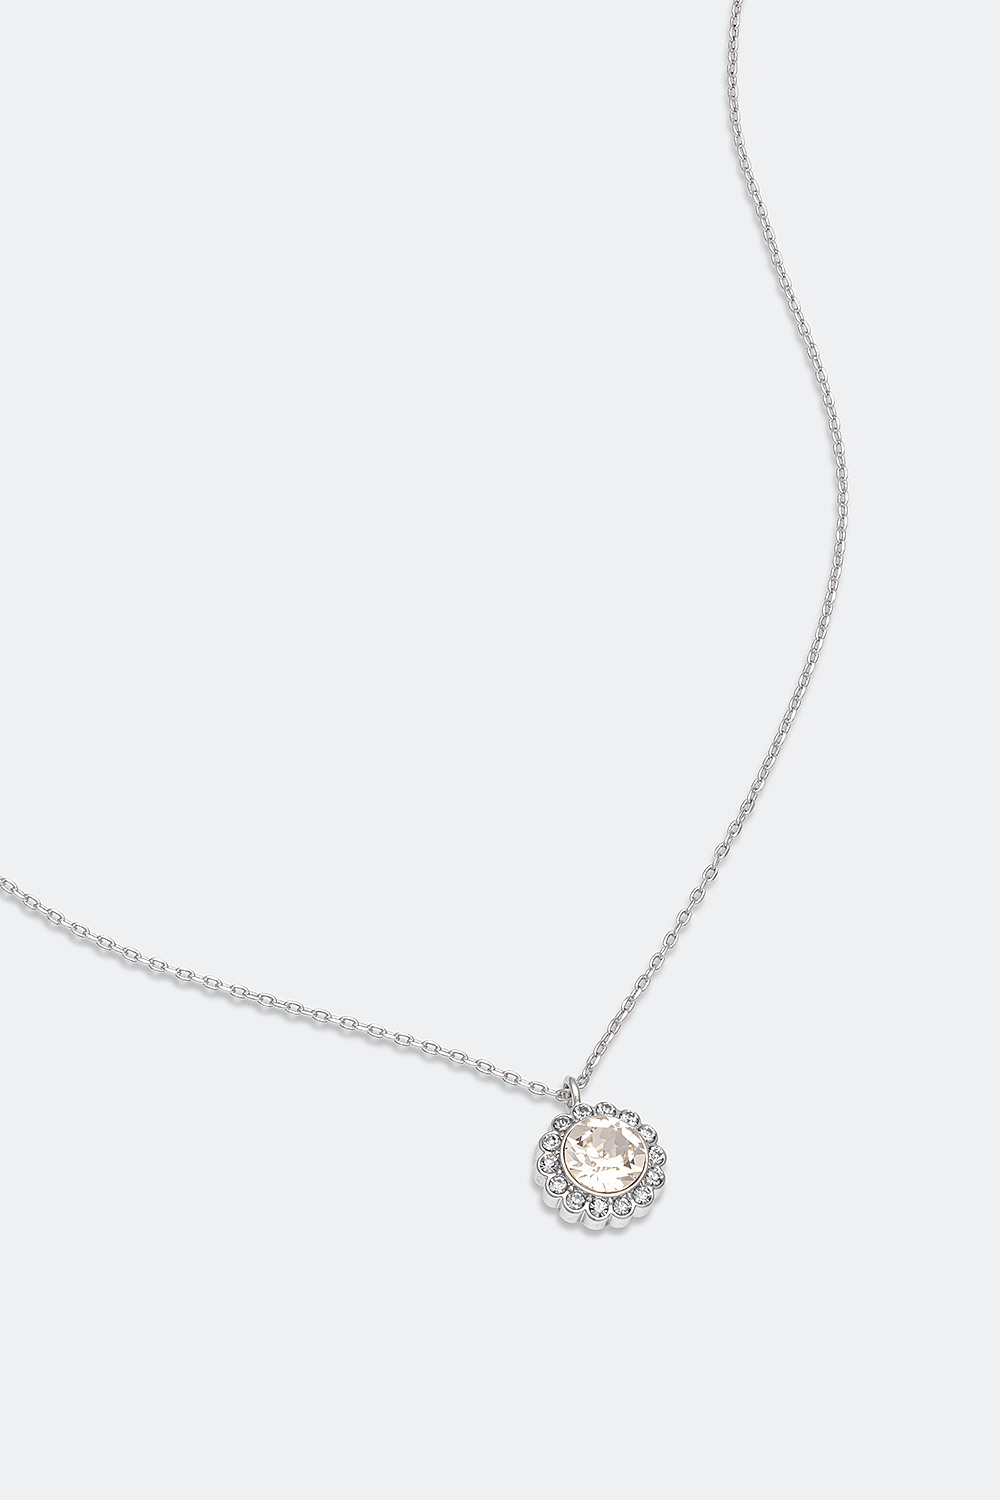 Miss Bea necklace - Silk i gruppen Lily and Rose - Halsband hos Glitter (254000268301)